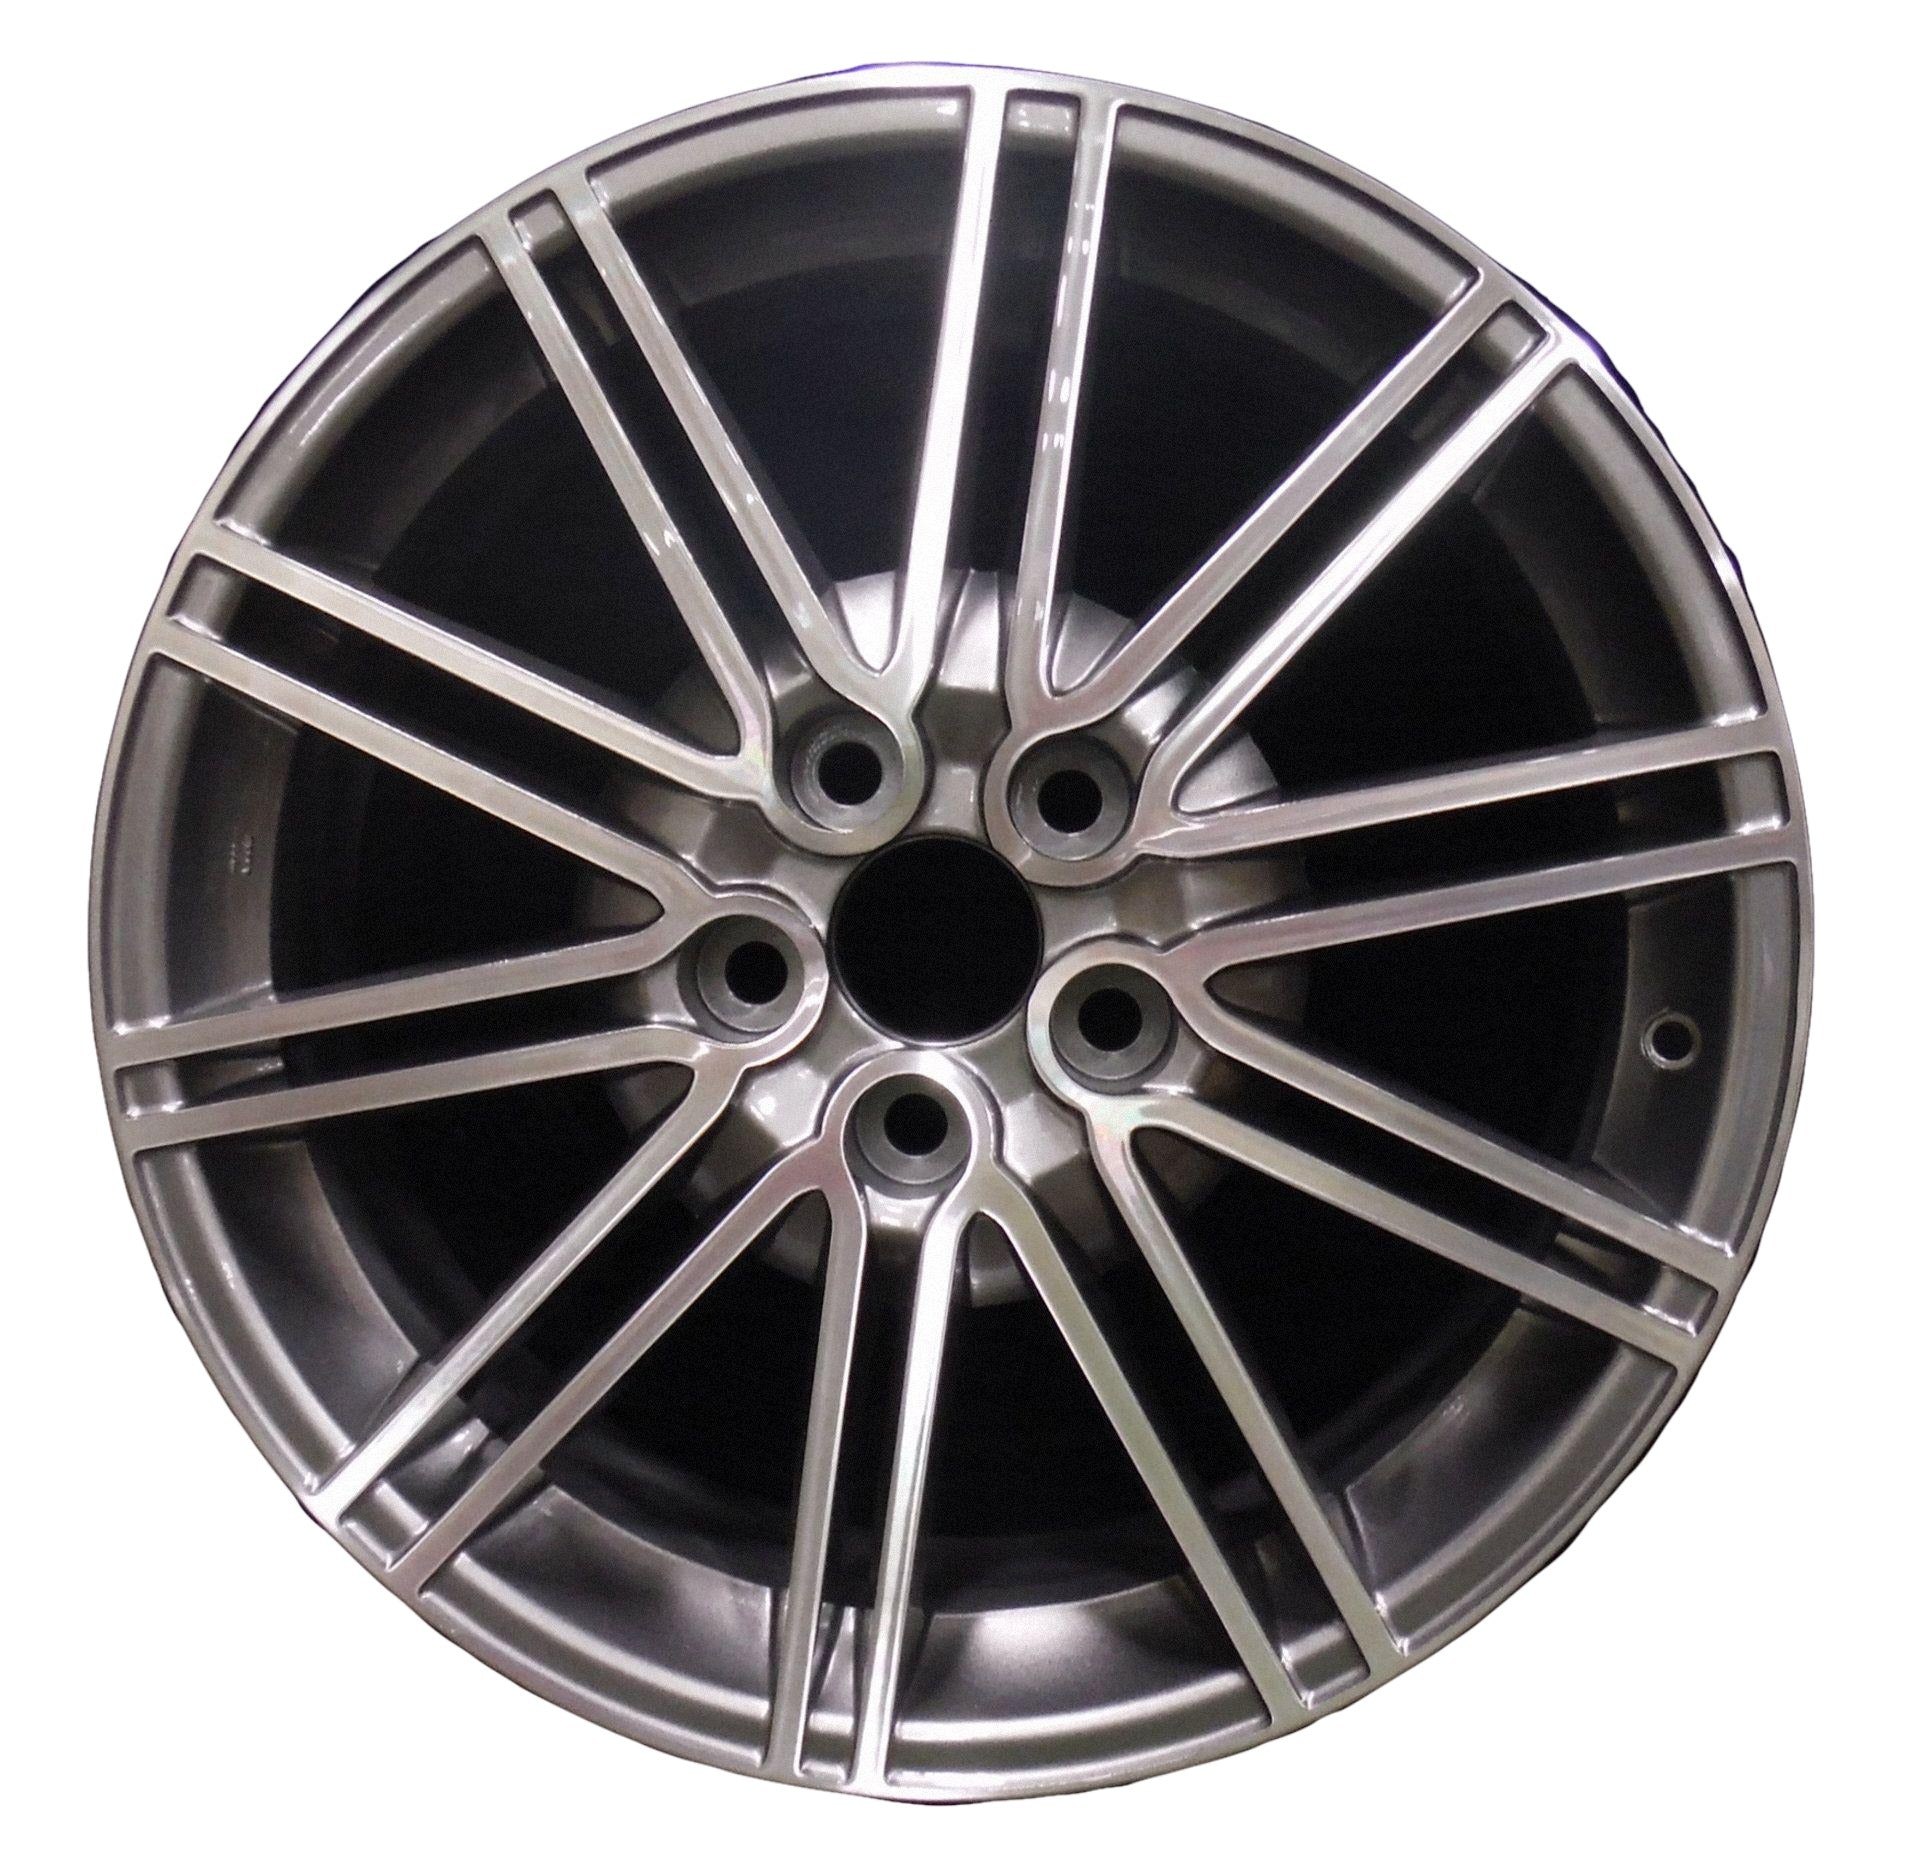 Toyota Camry  2007, 2008, 2009, 2010, 2011 Factory OEM Car Wheel Size 18x7.5 Alloy WAO.180086.LC04.MA